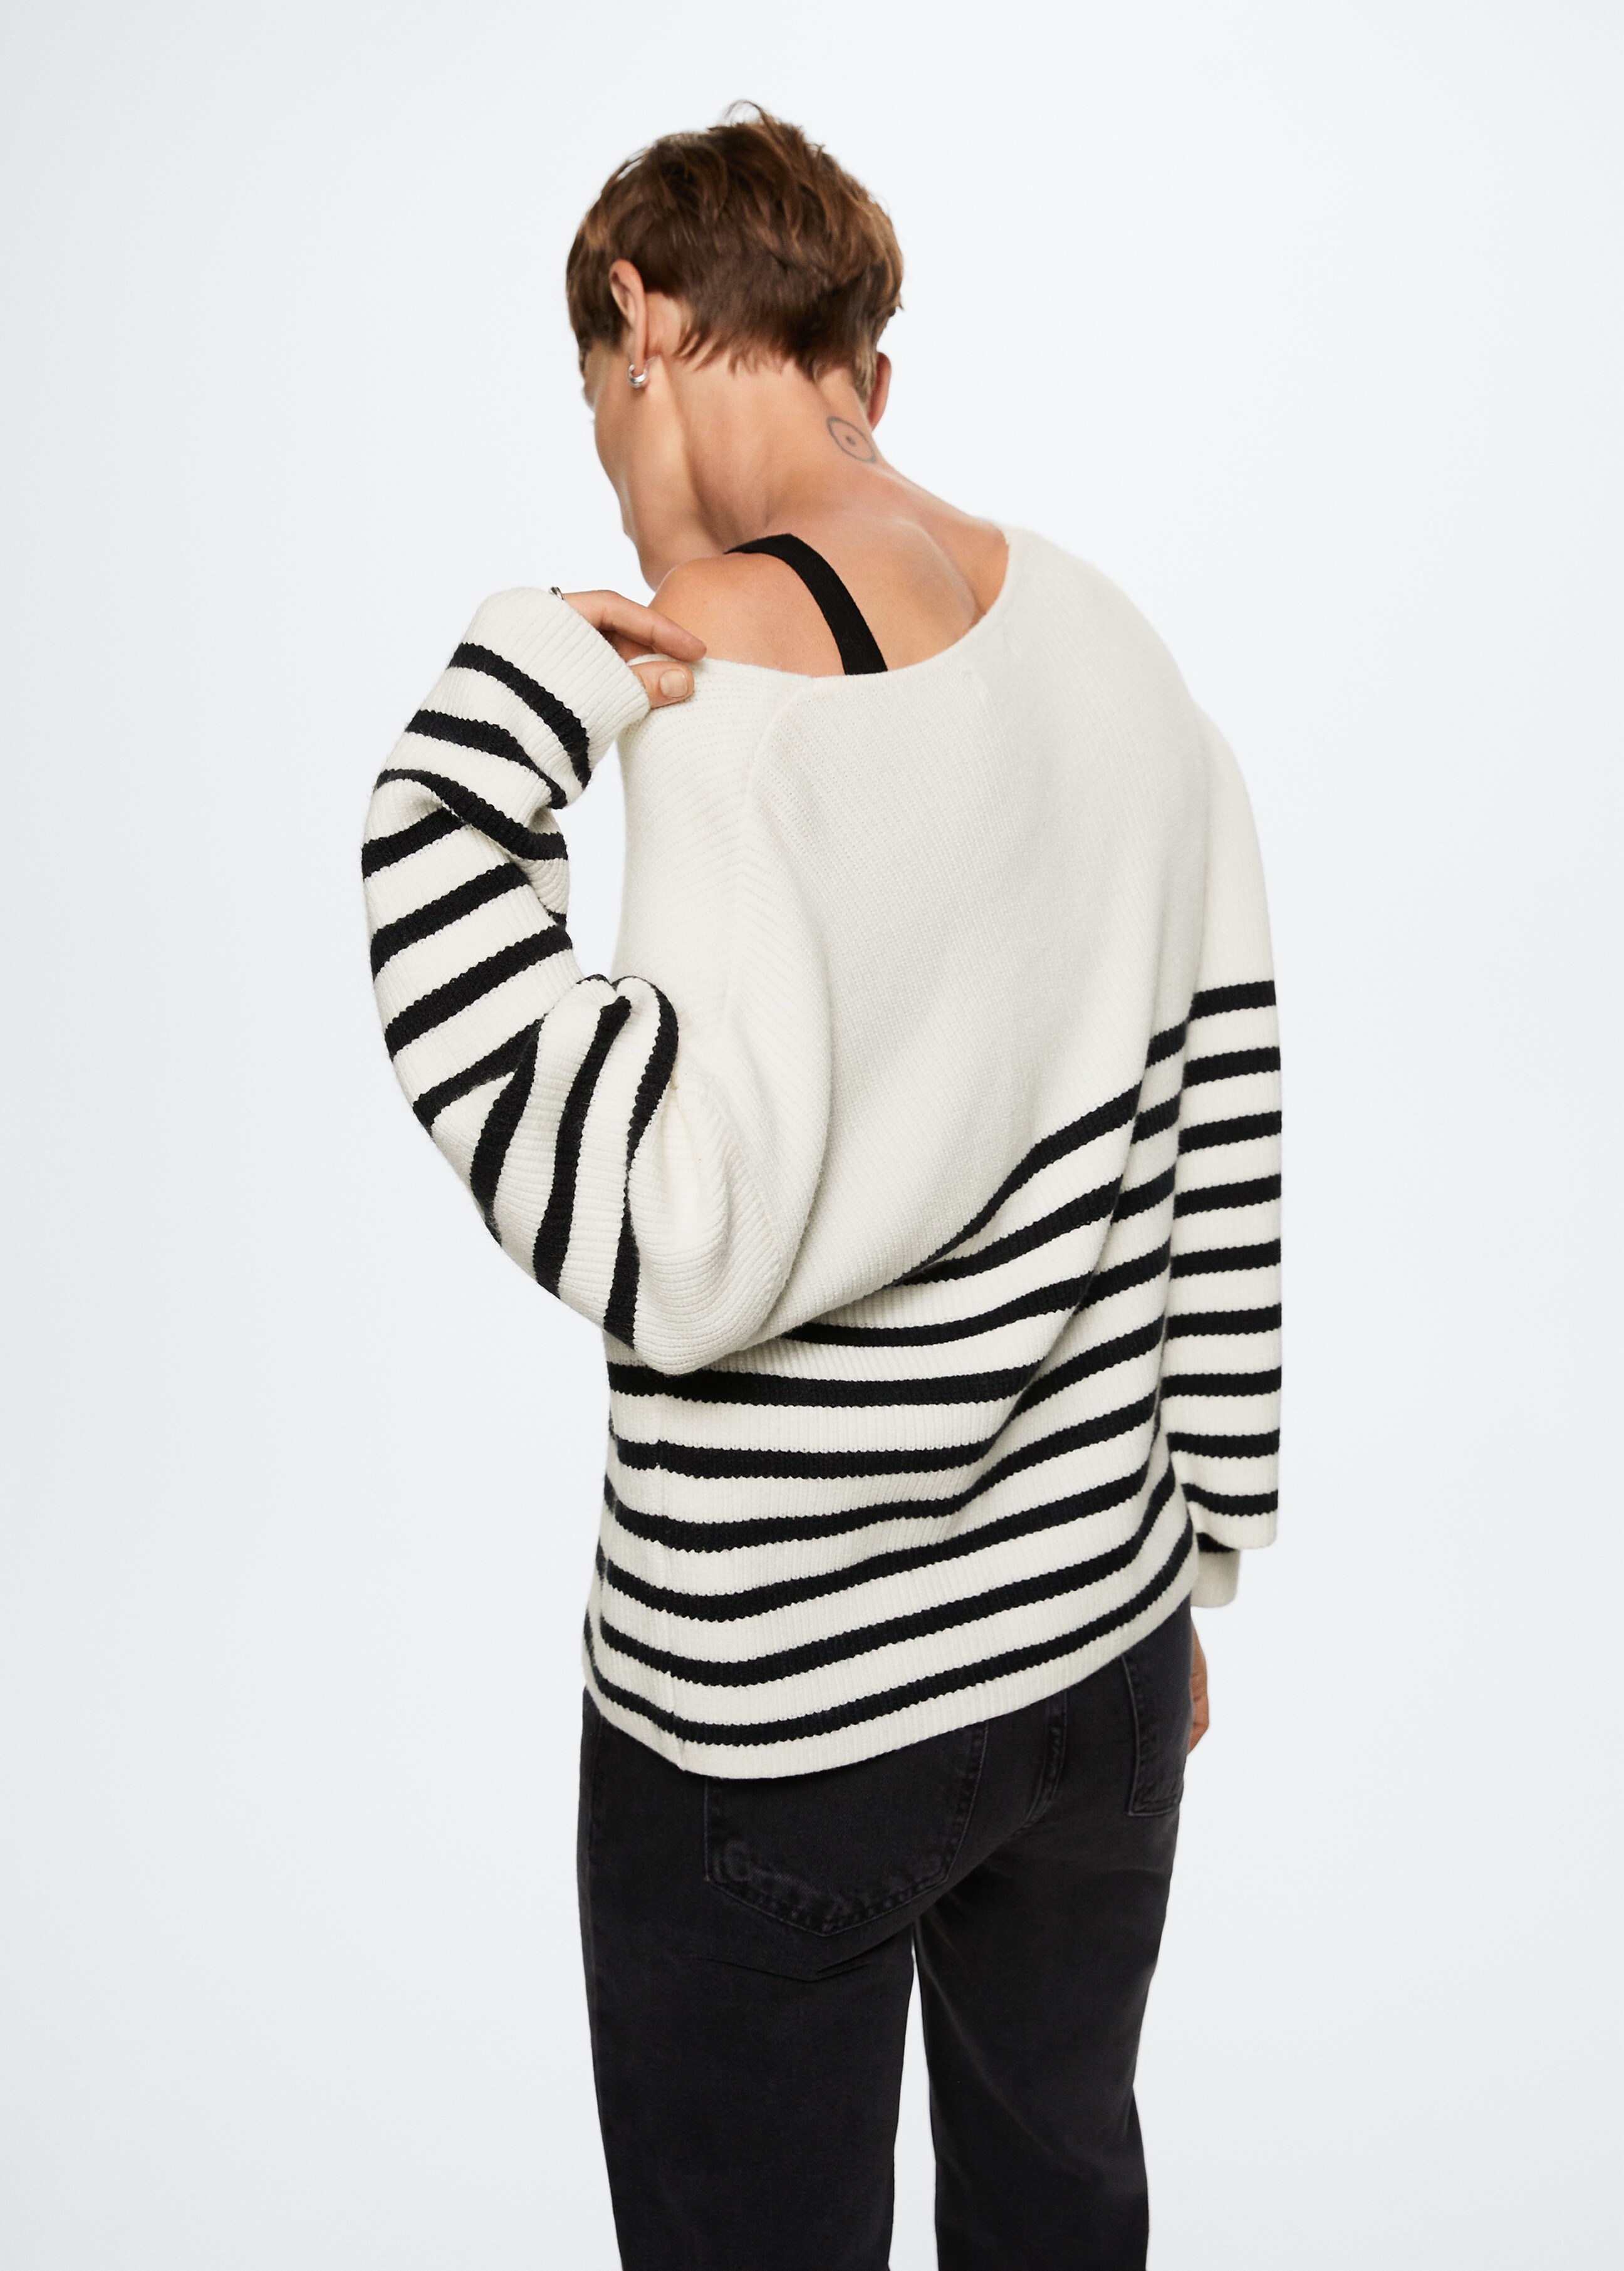 Oversized striped sweater - Reverse of the article